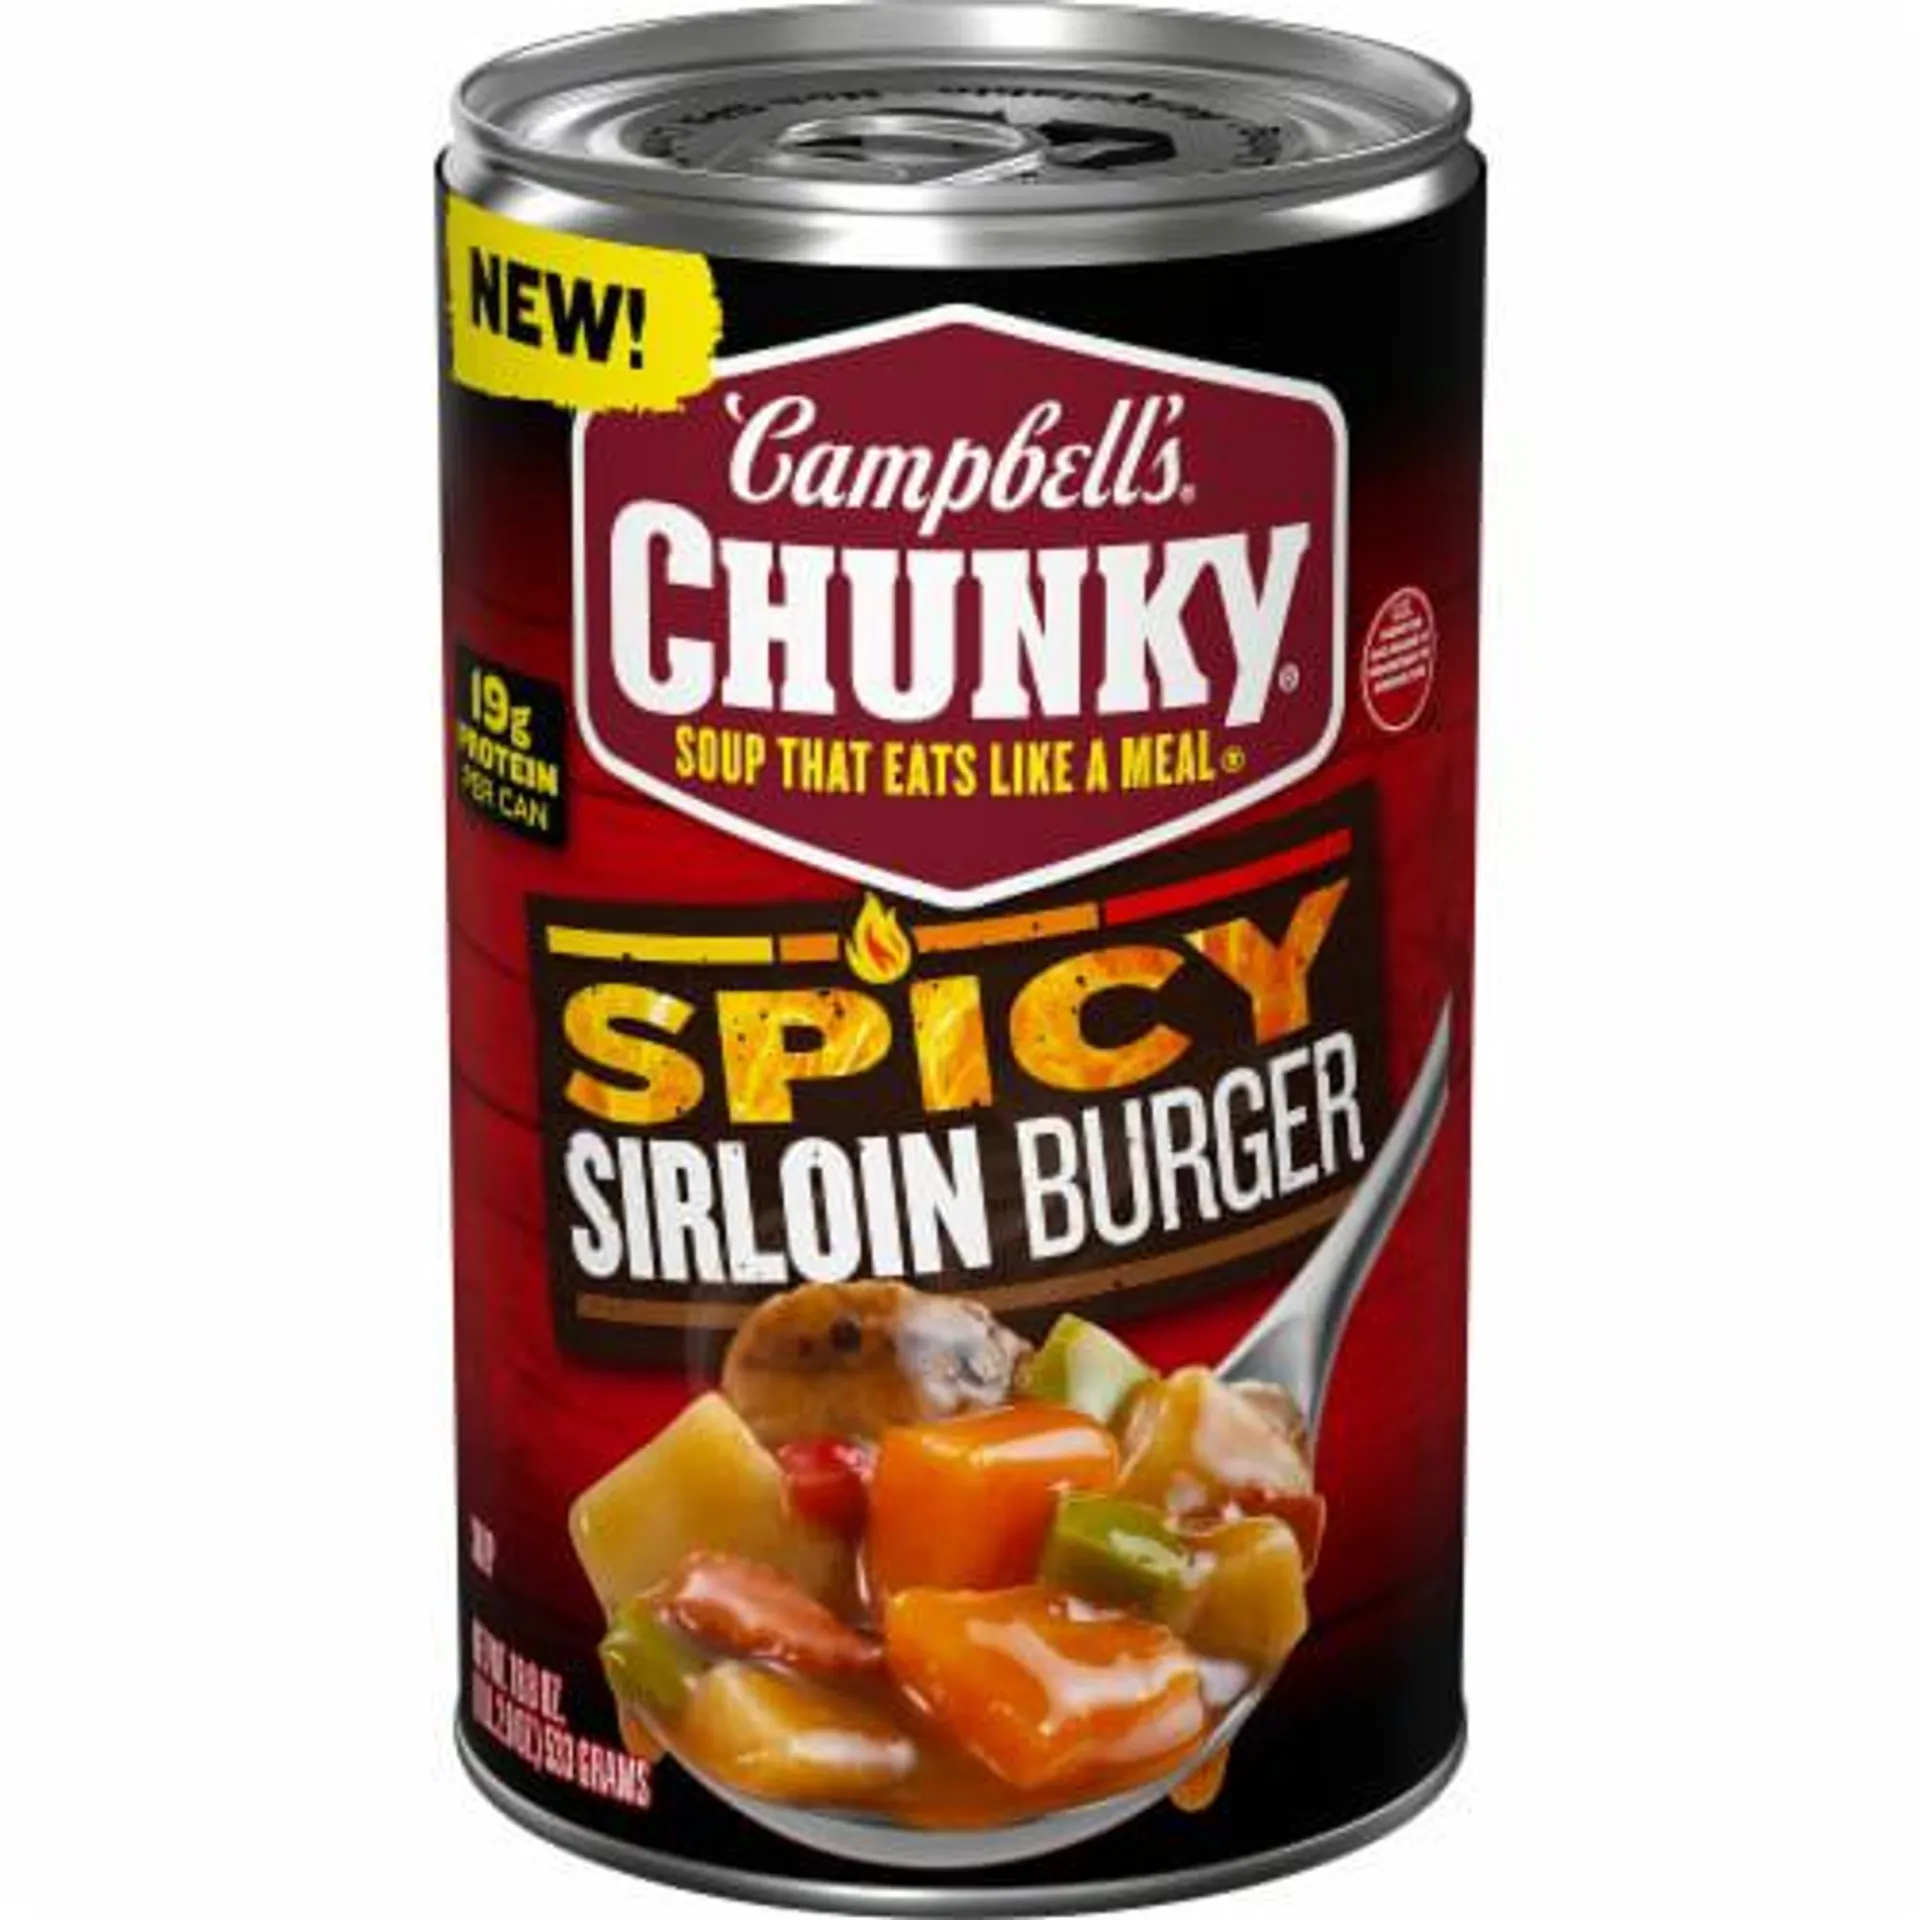 Cambell's Chunky® Spicy Sirloin Burger Soup